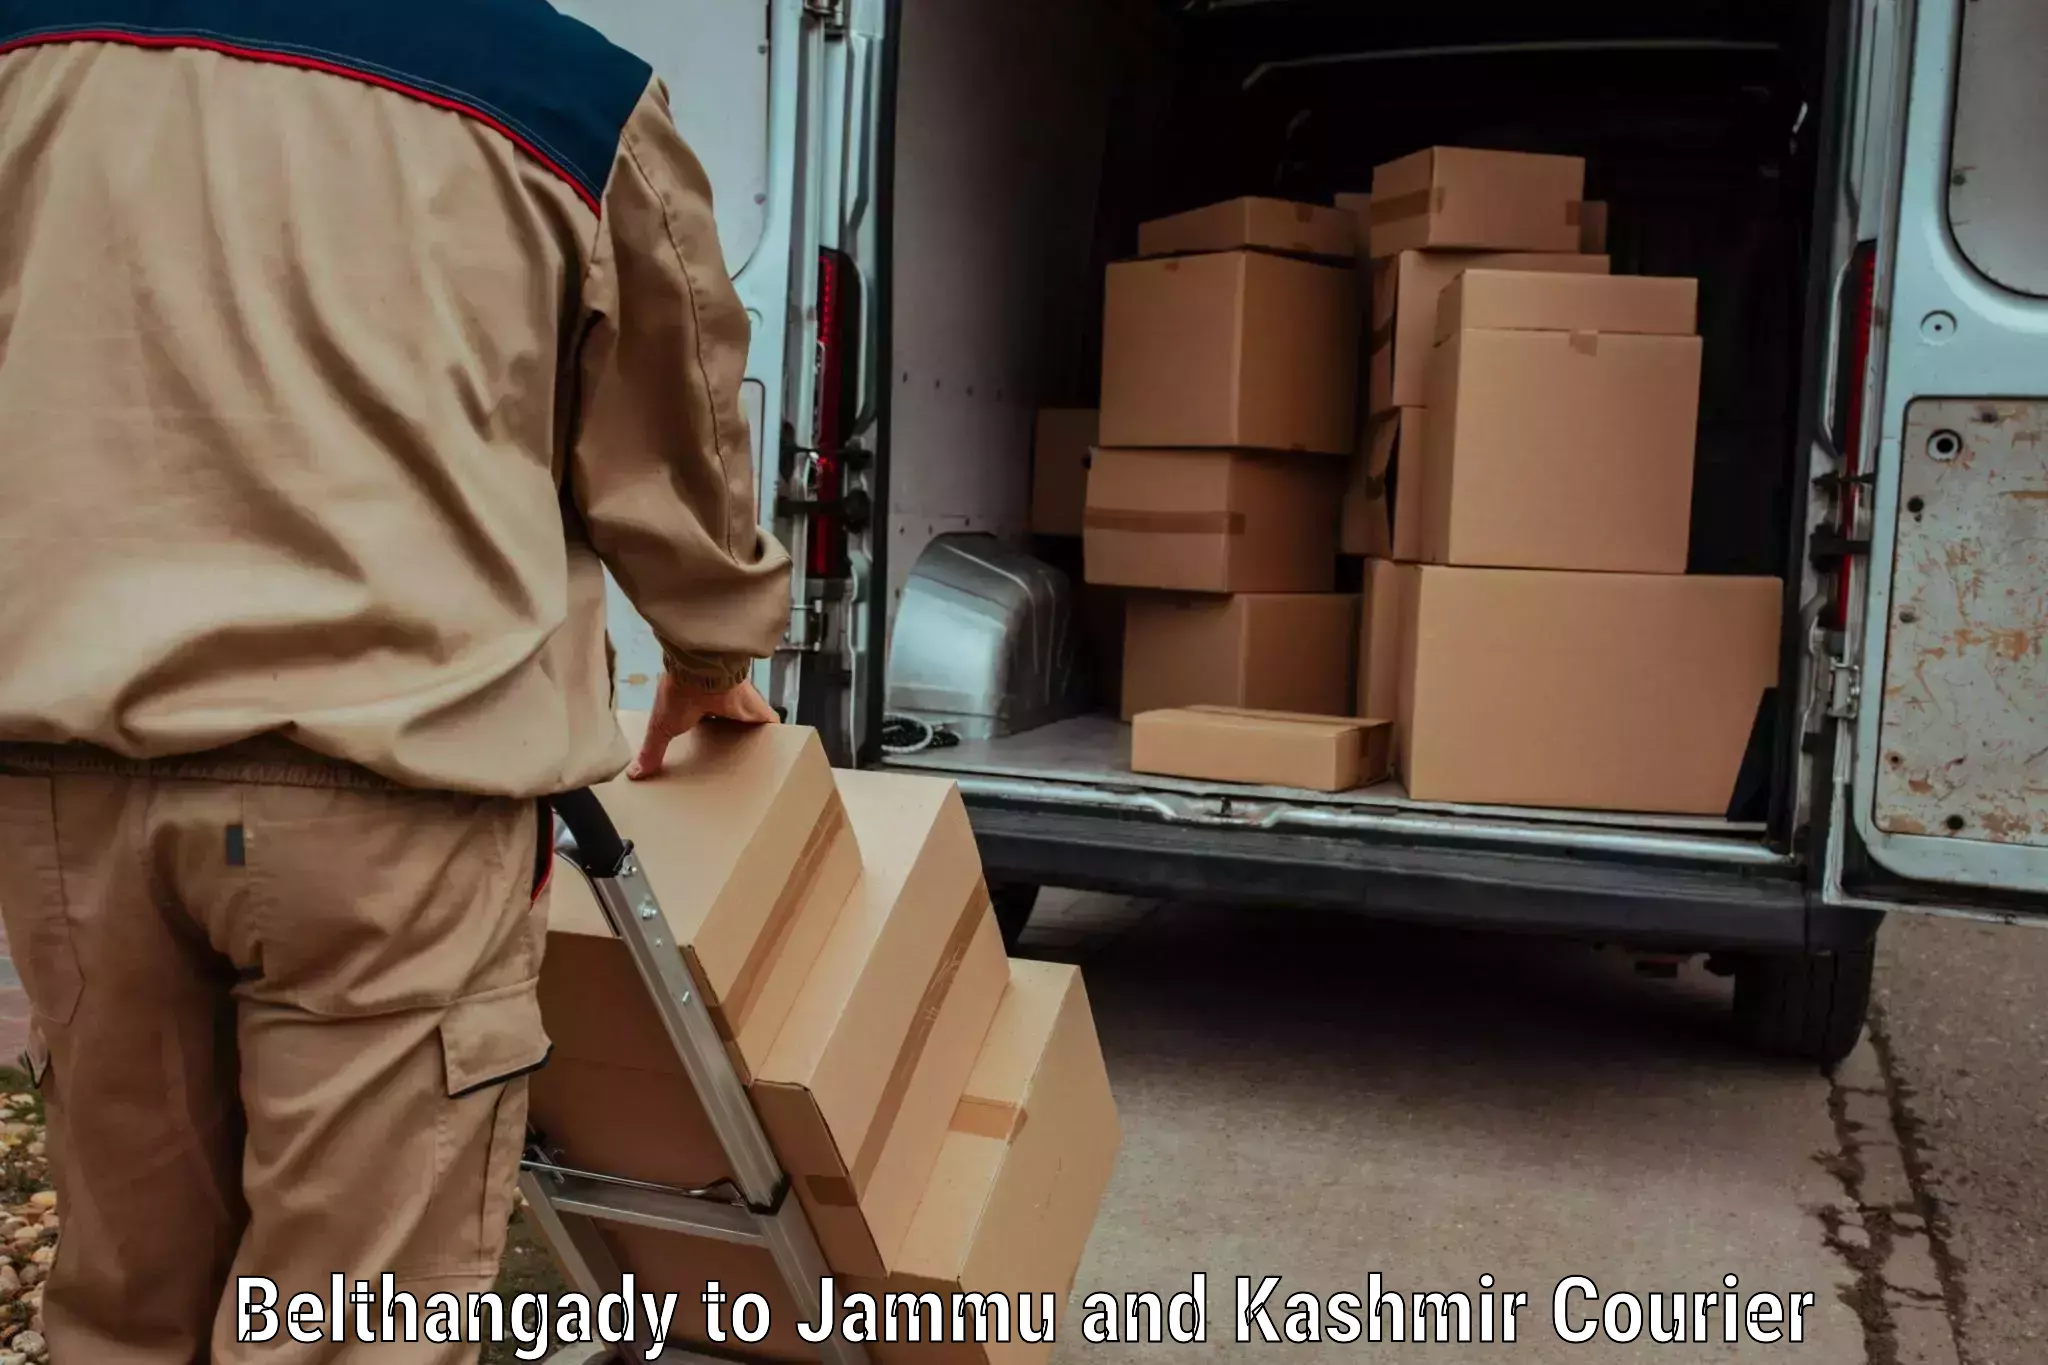 Subscription-based courier Belthangady to Baramulla